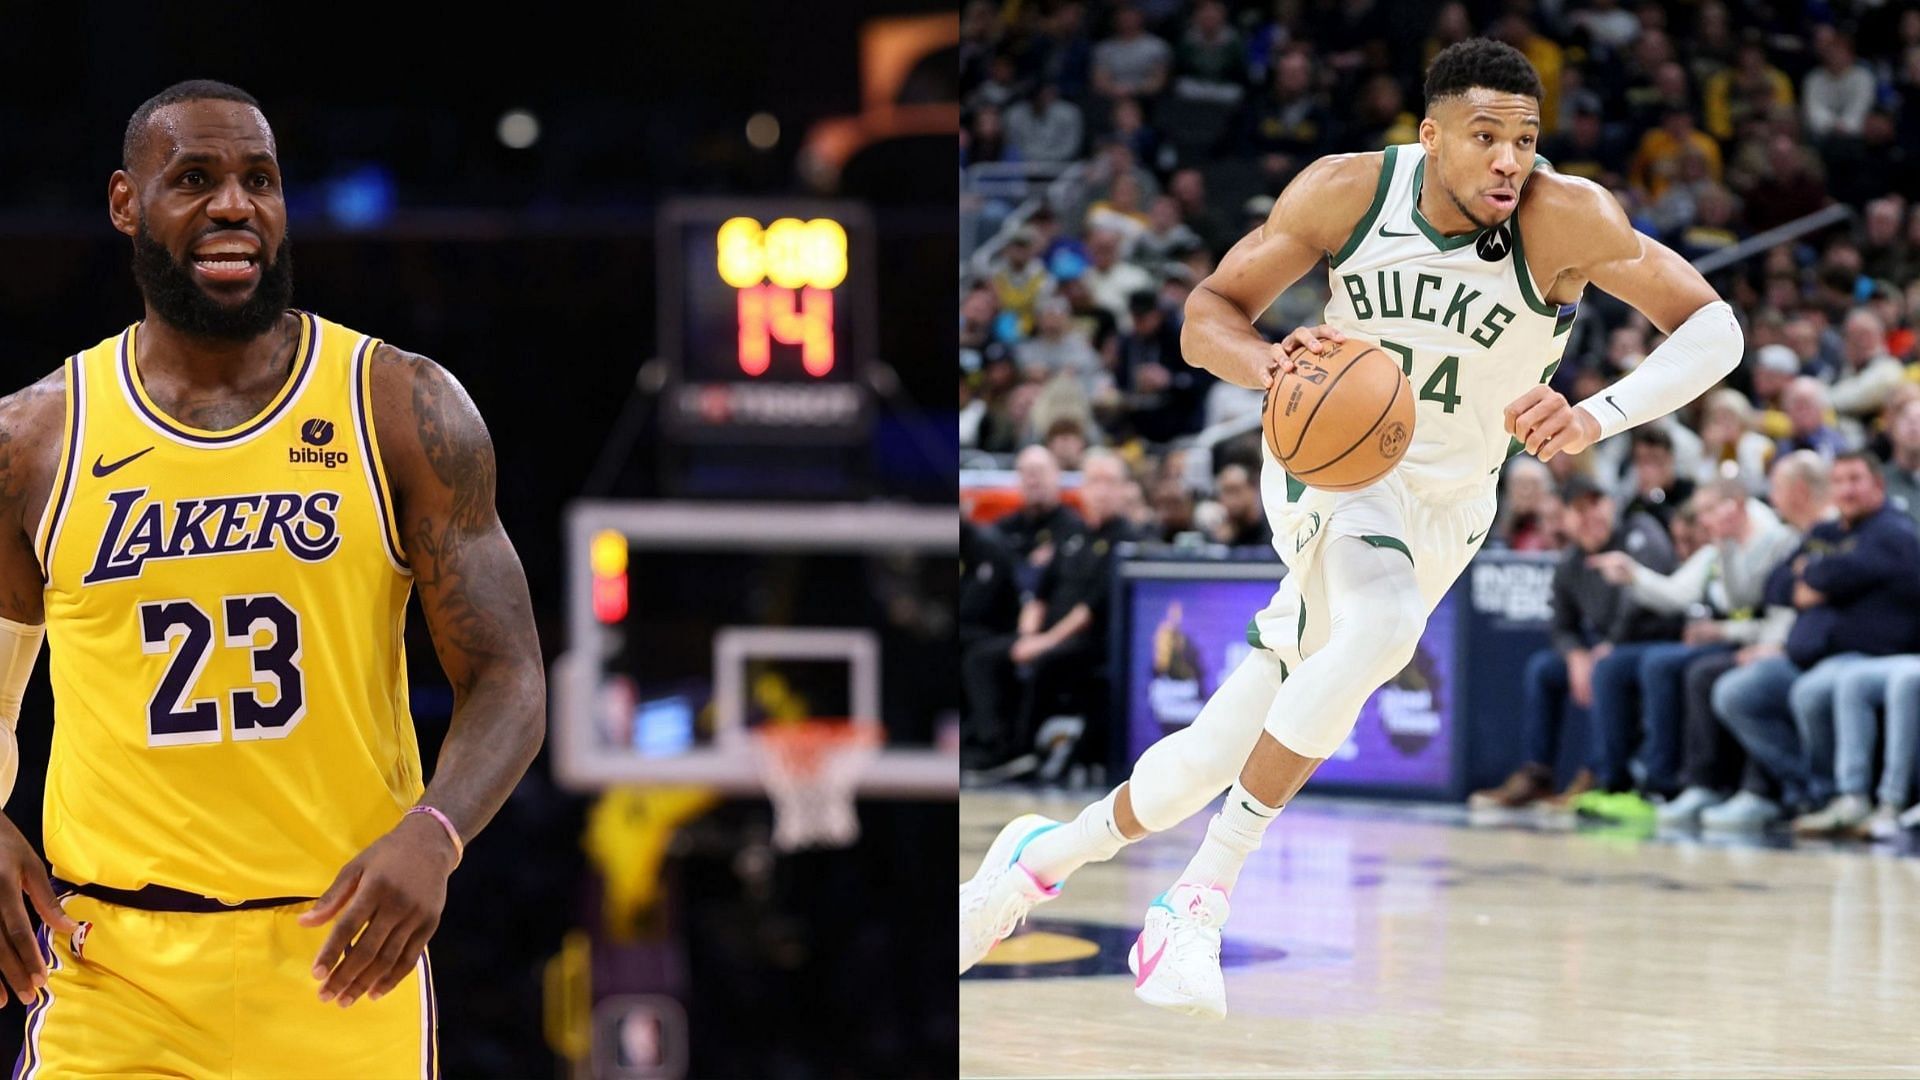 LeBron James and Giannis Antetokounmpo lead the league in NBA All-Star voting.